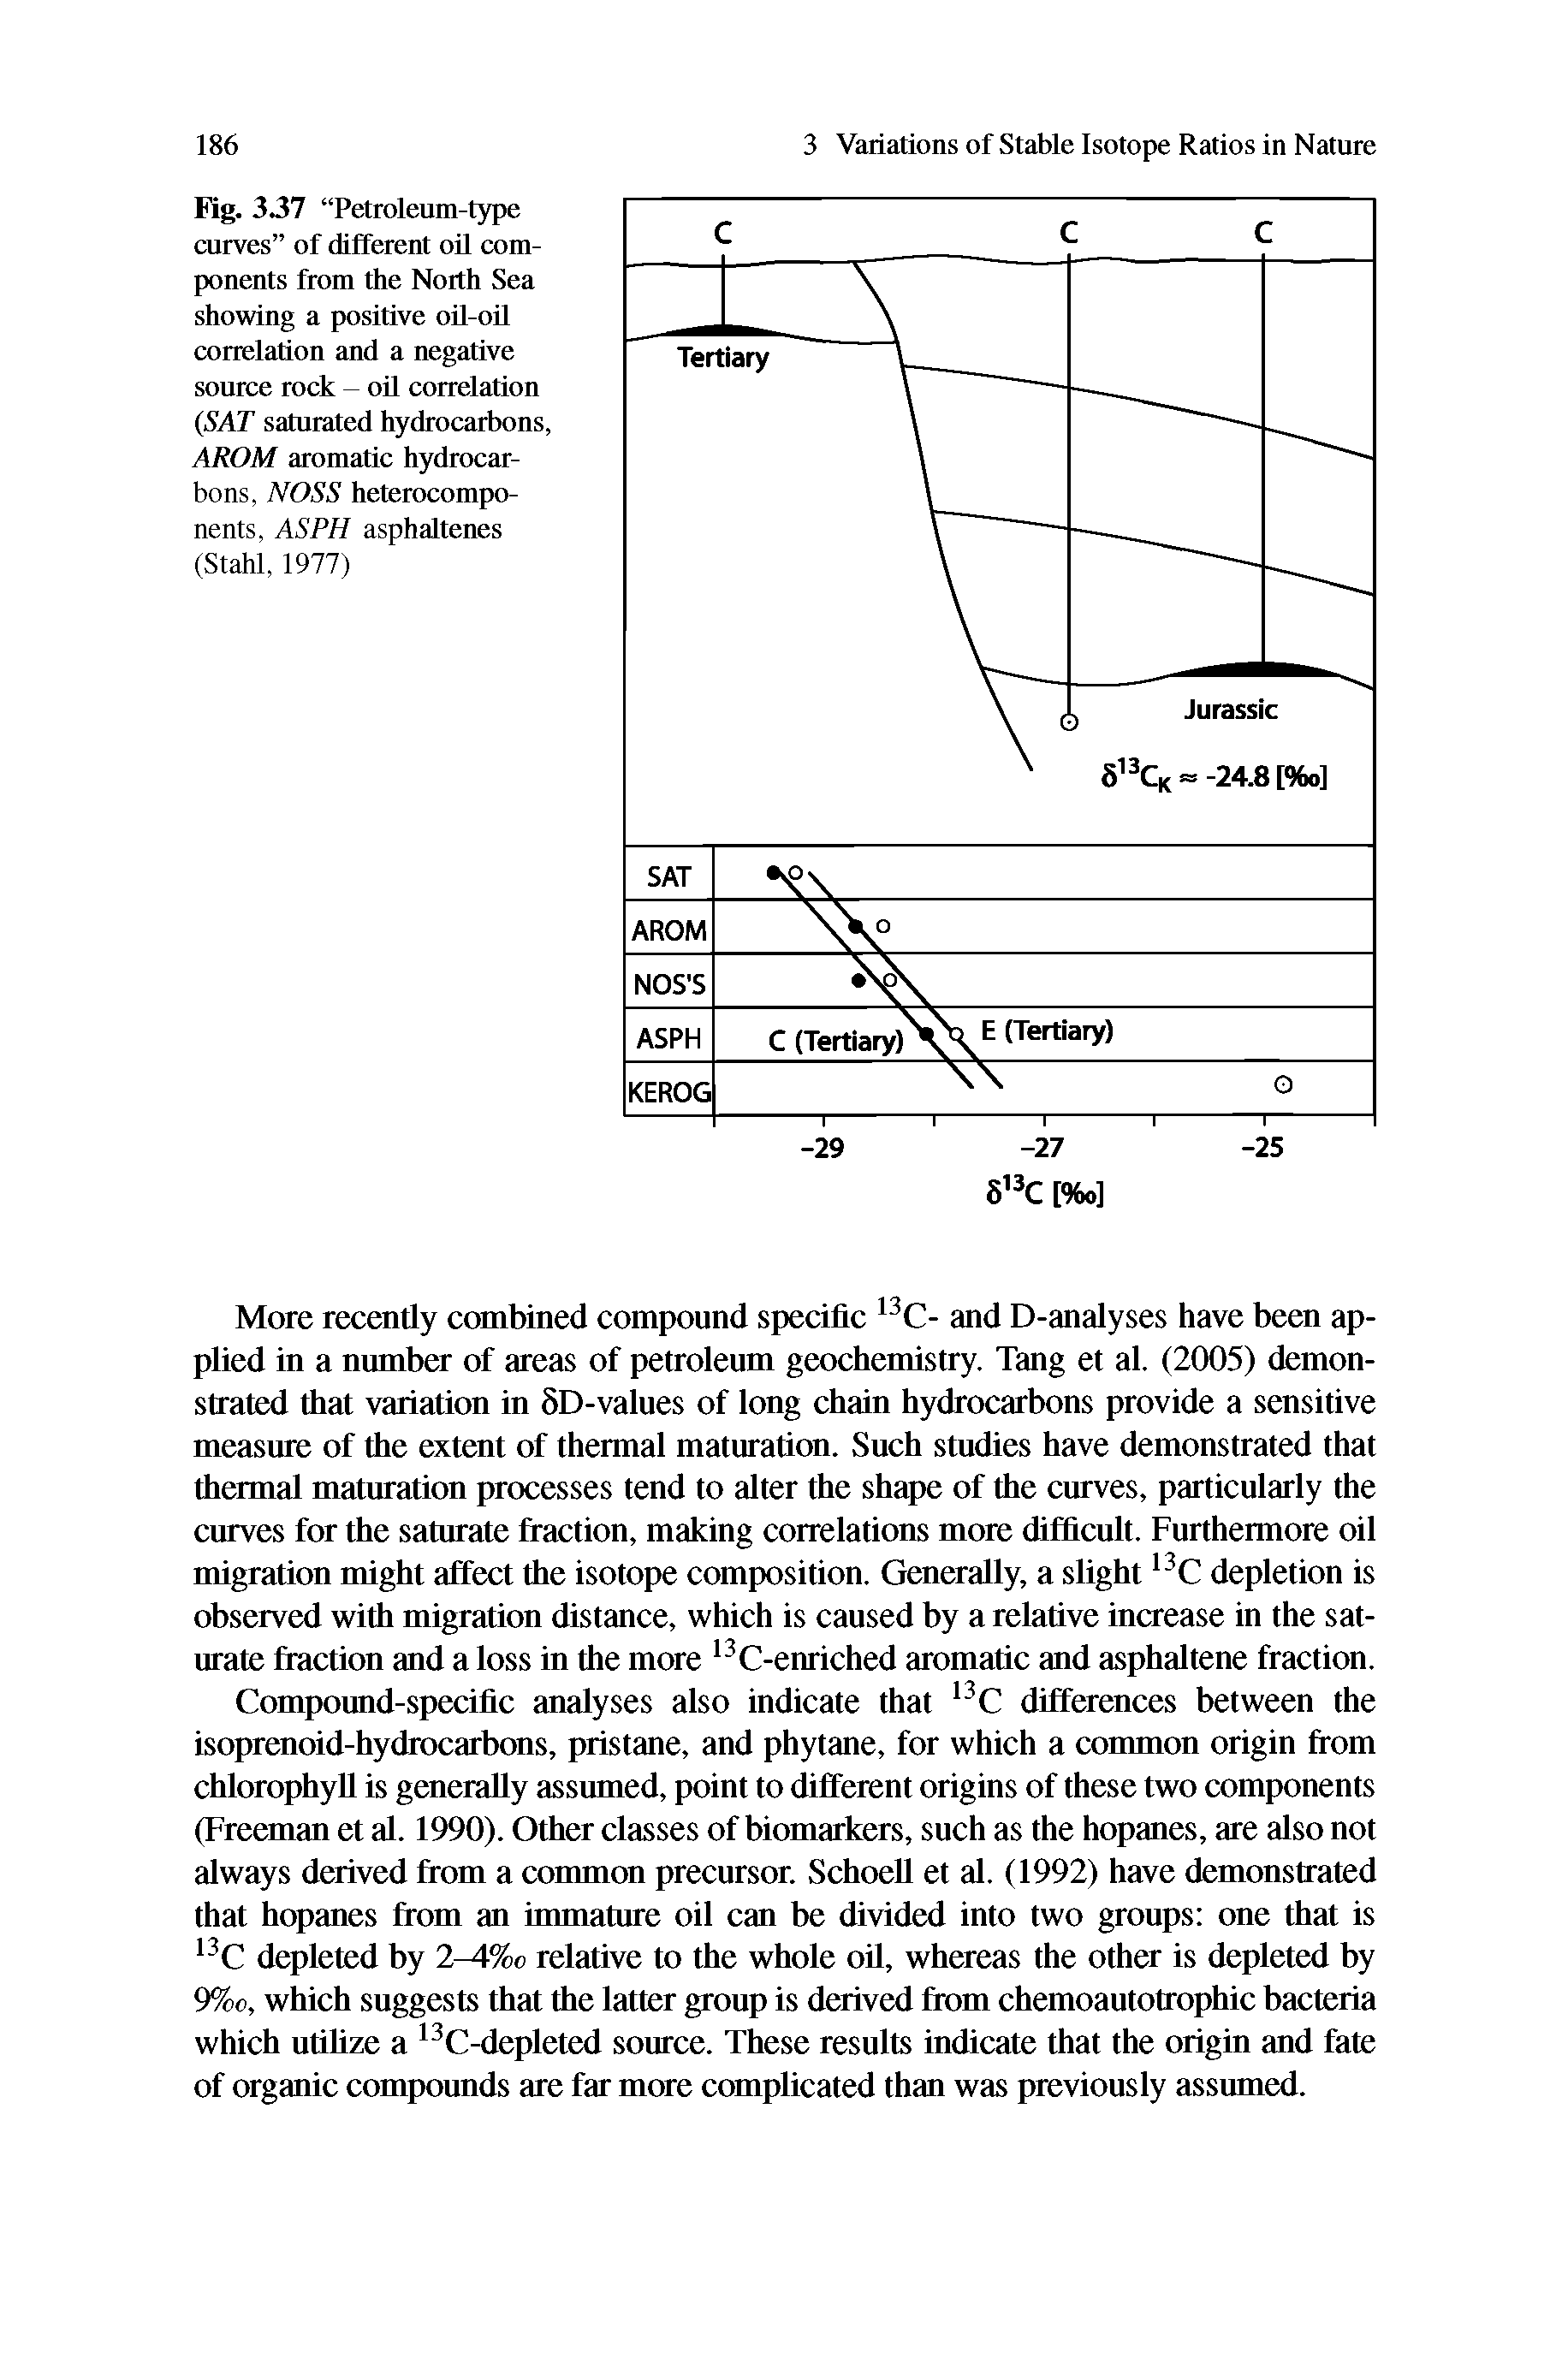 Fig. 3 Petroleum-type curves of different oU components from the North Sea showing a positive oU-oU correlation and a negative source rock - oU correlation (SAT saturated hydrocarbons, AROM aromatic hydrocarbons, NOSS heterocomponents, AS PH asphaltenes (Stahl, 1977)...